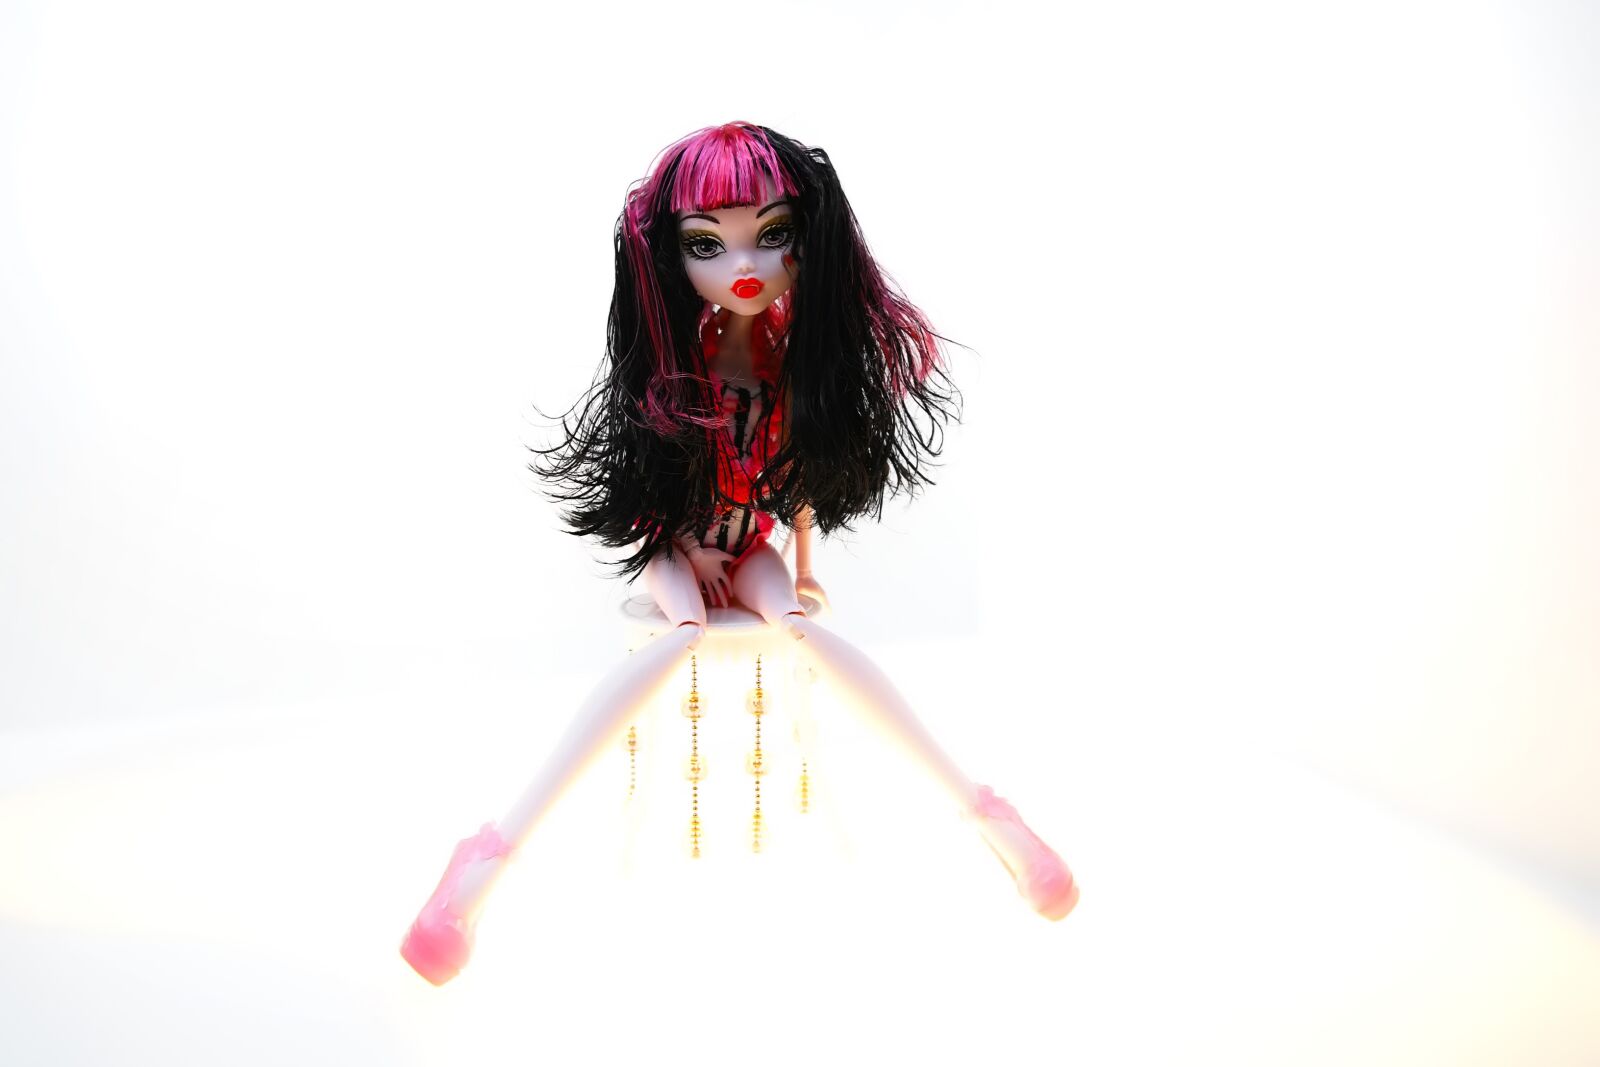 Sigma SD1 Merrill sample photo. Doll, monster high, figure photography